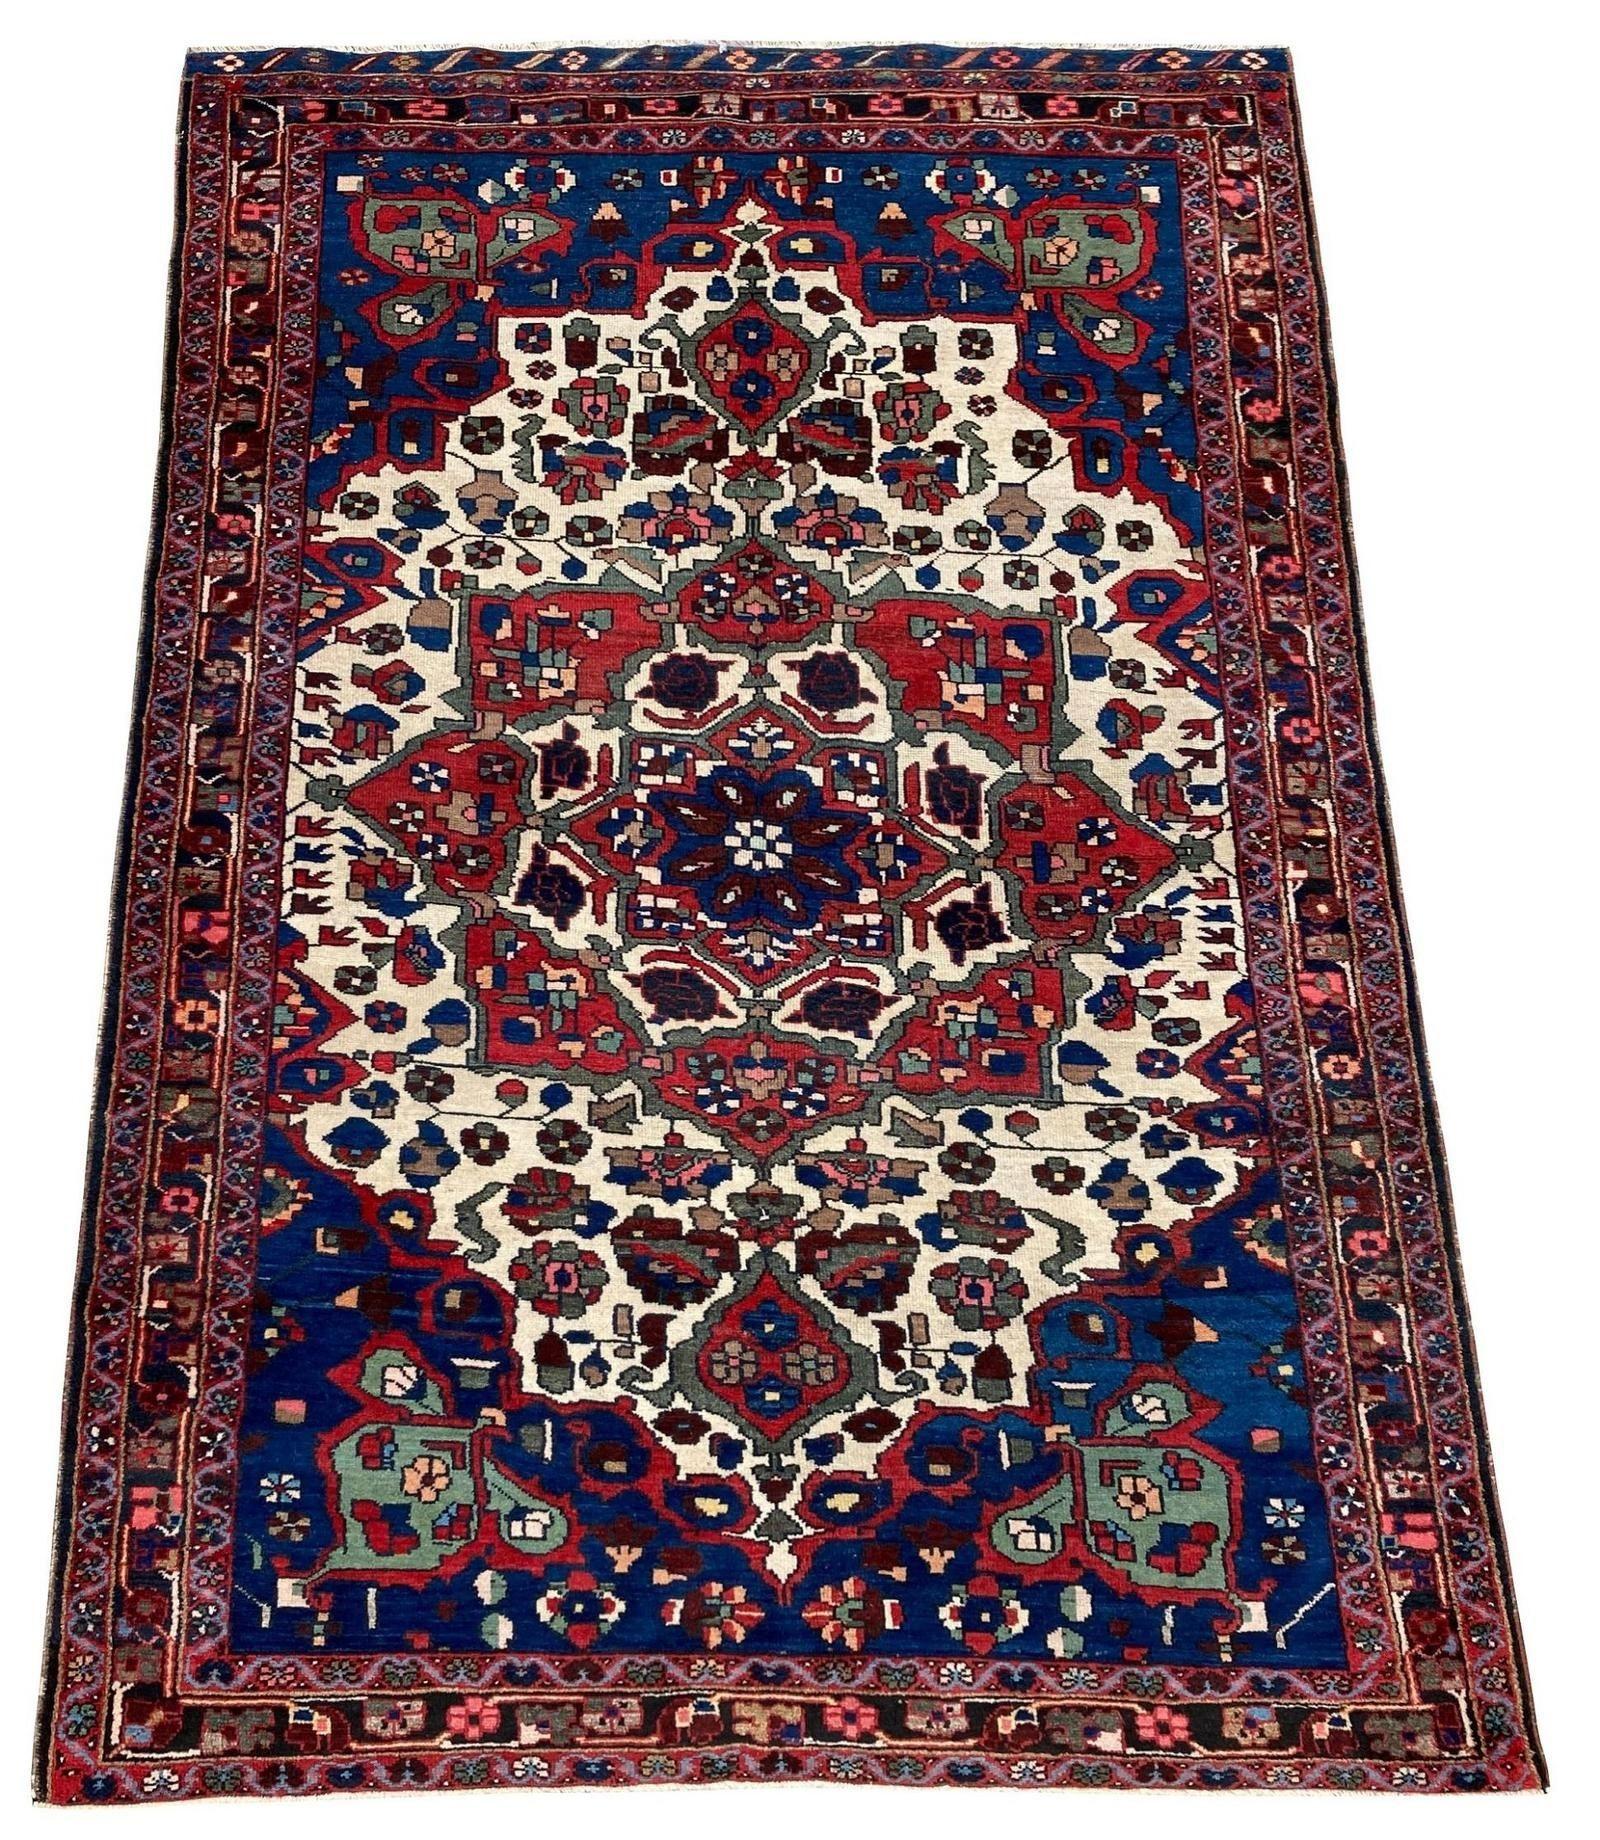 A beautiful antique Bakhtiar rug, handwoven circa 1910 with a circular medallion on an ivory field of stylised flowers. Lovely wool quality and fabulous secondary colours!
Size: 1.92m x 1.35m (6ft 4in x 4ft 5in)
This rug is in good, original